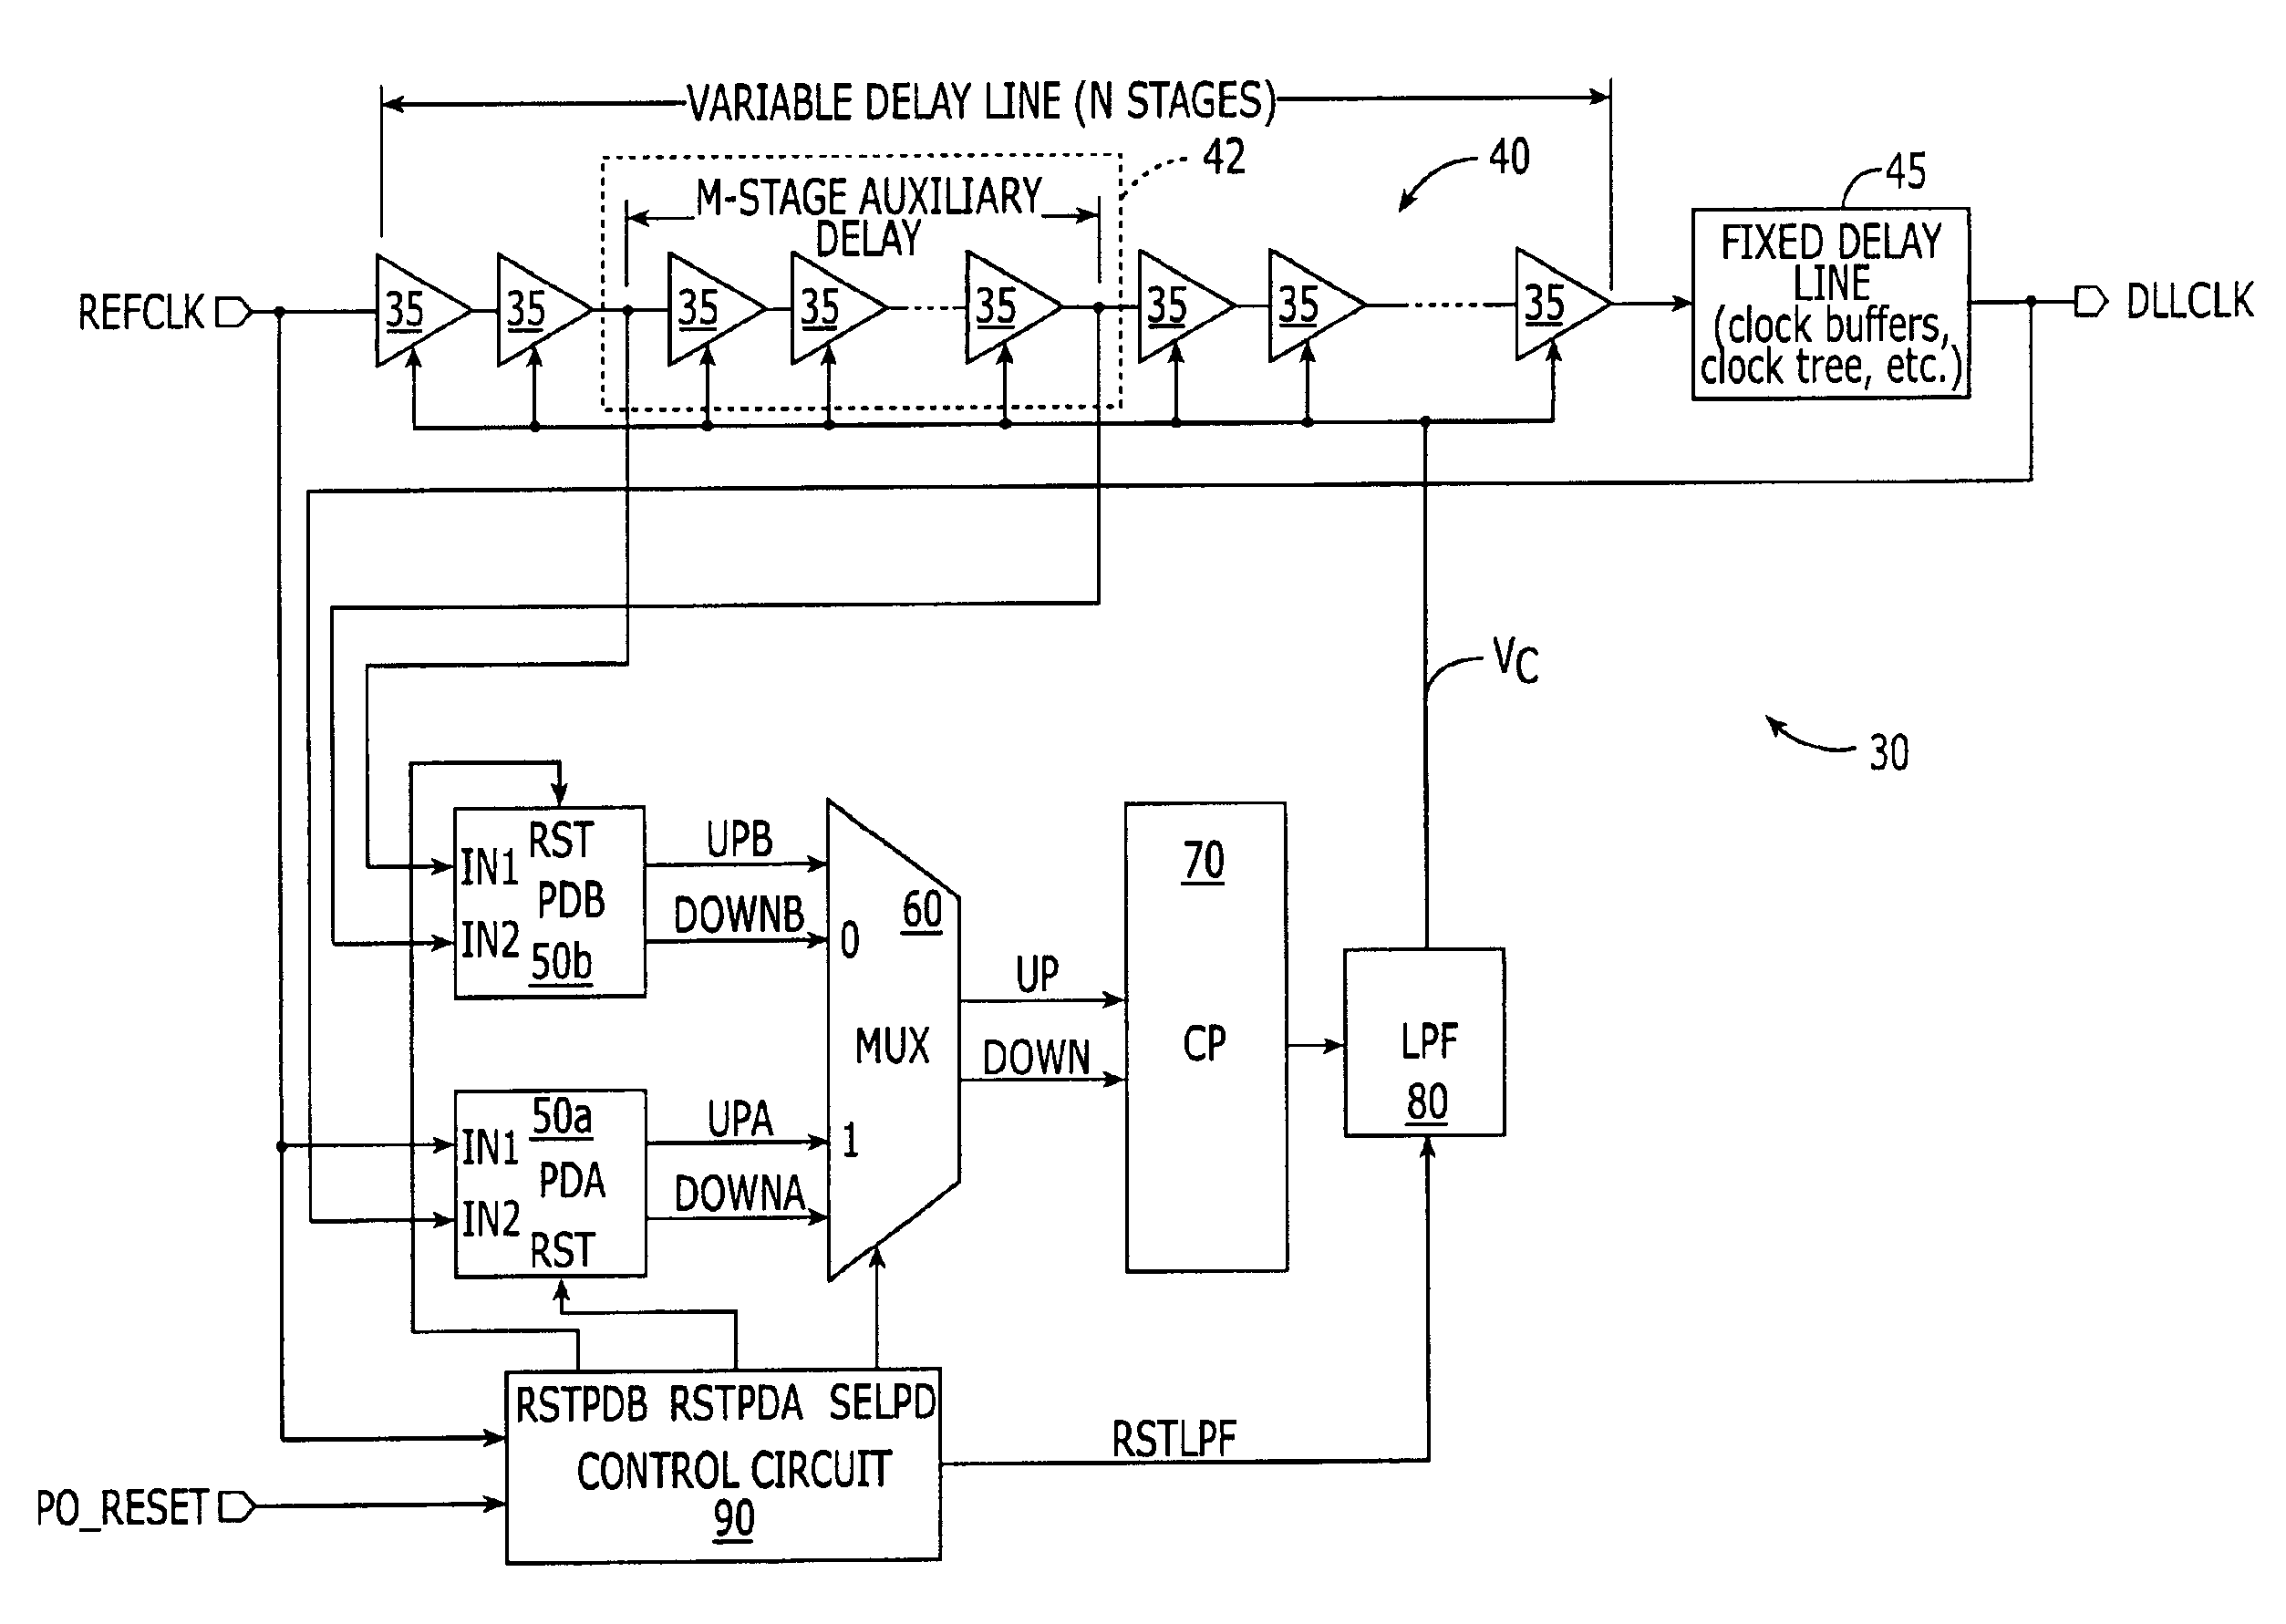 Delay-locked loop (DLL) integrated circuits having high bandwidth and reliable locking characteristics